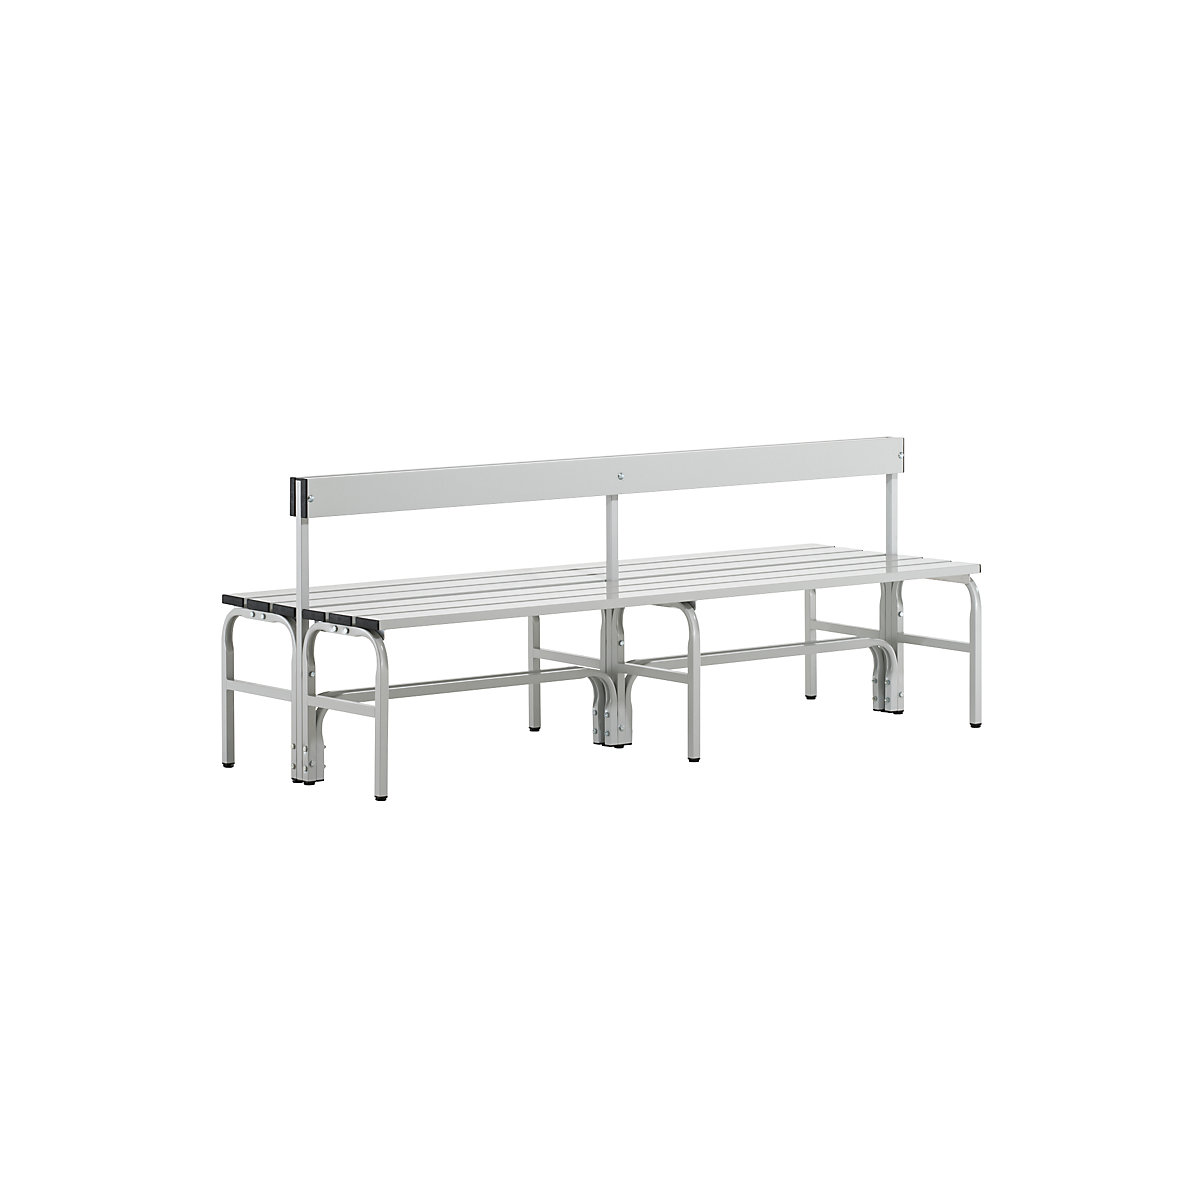 Sypro – Half height cloakroom bench with back rest, double sided, aluminium, length 2000 mm, light grey